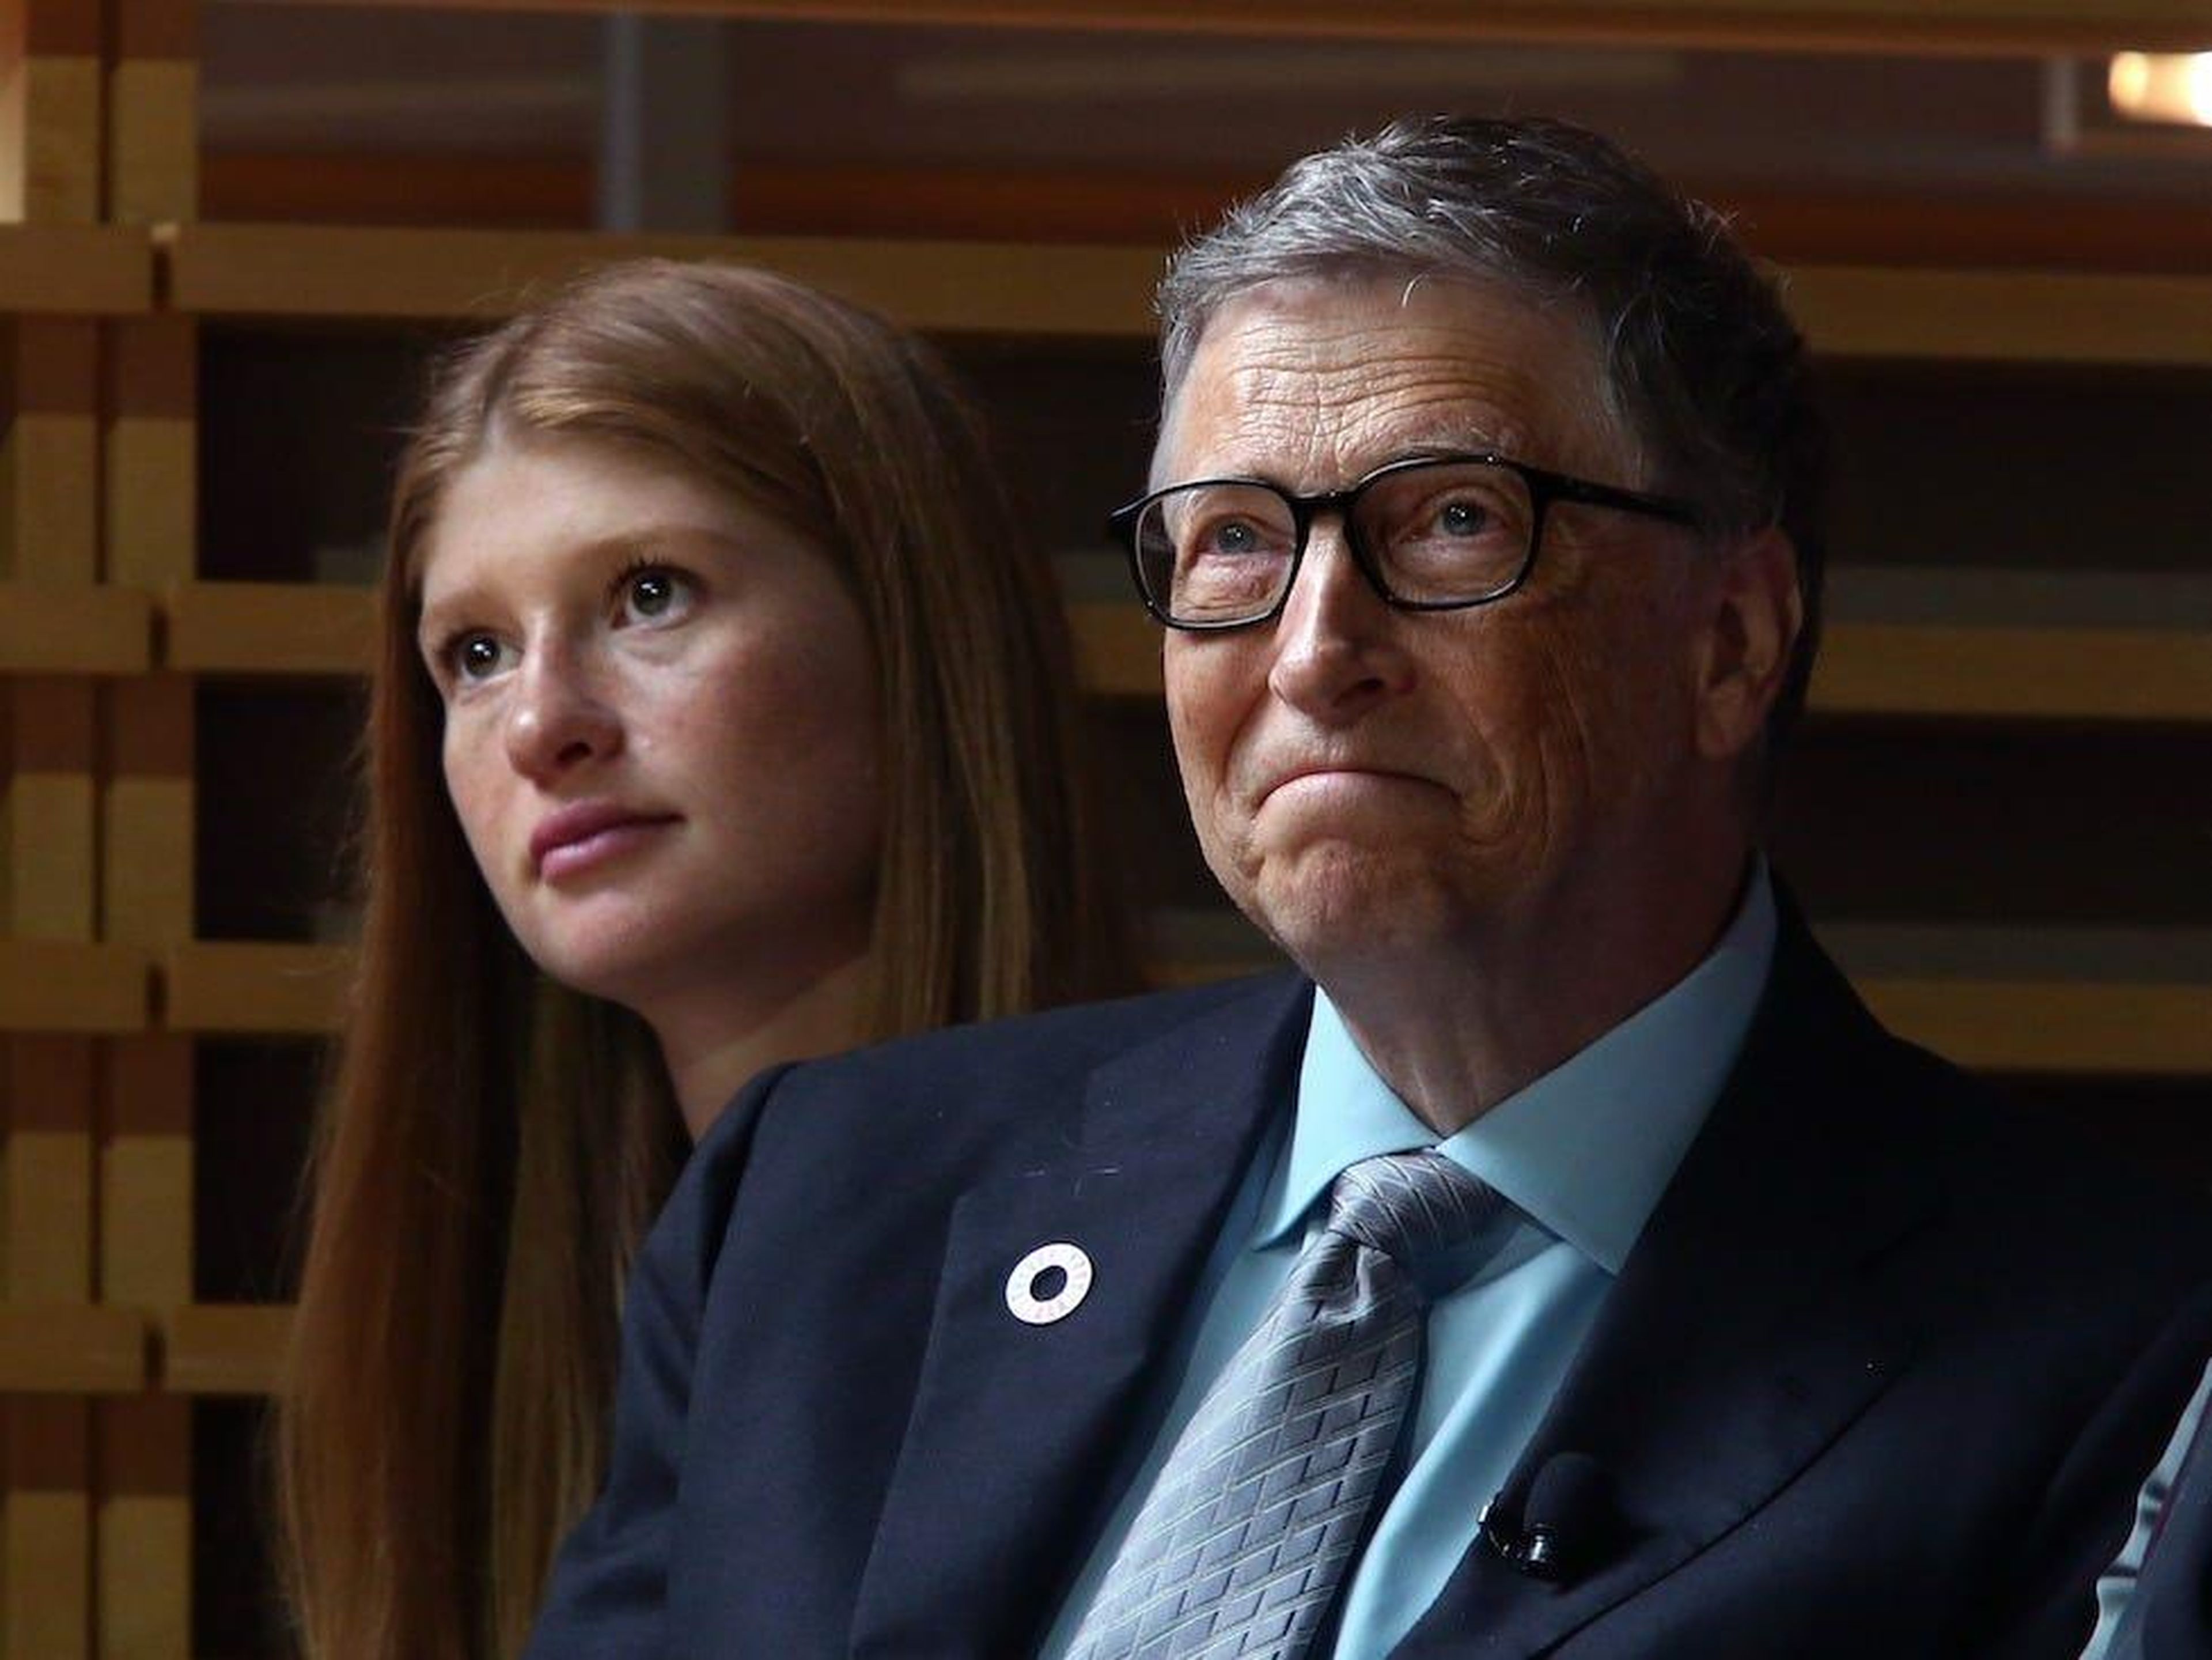 'I was born into a huge situation of privilege': Bill Gates' oldest daughter discusses growing up in a billionaire household